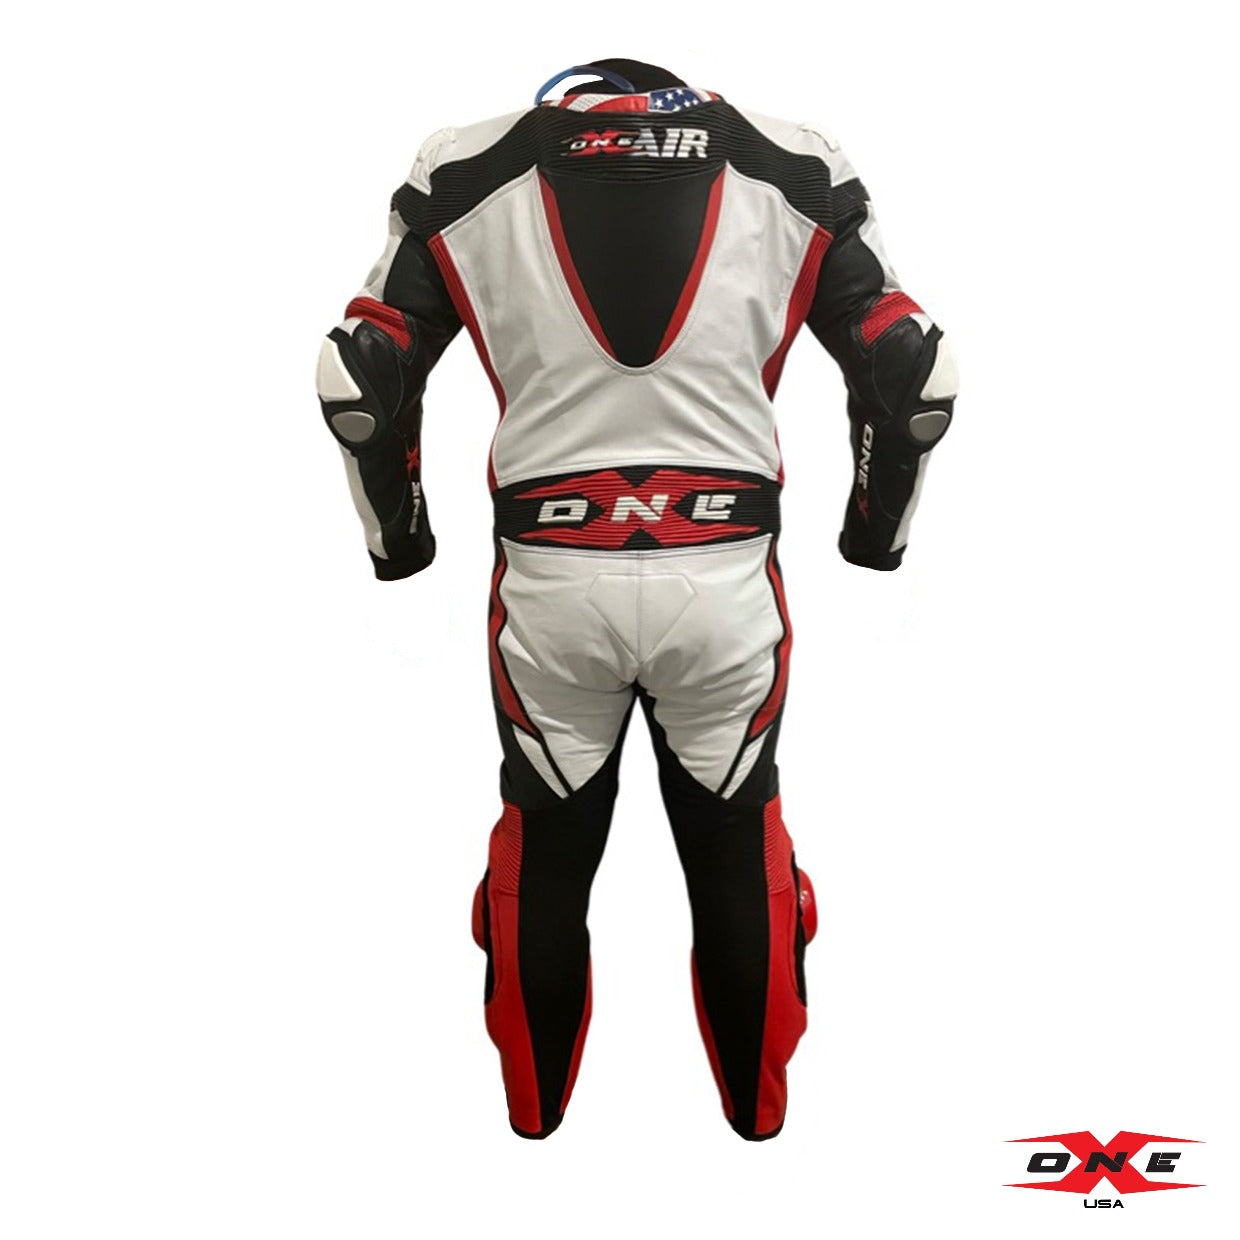 OneX USA XR22 Airbag Ready Pro Race Suit - White/Red